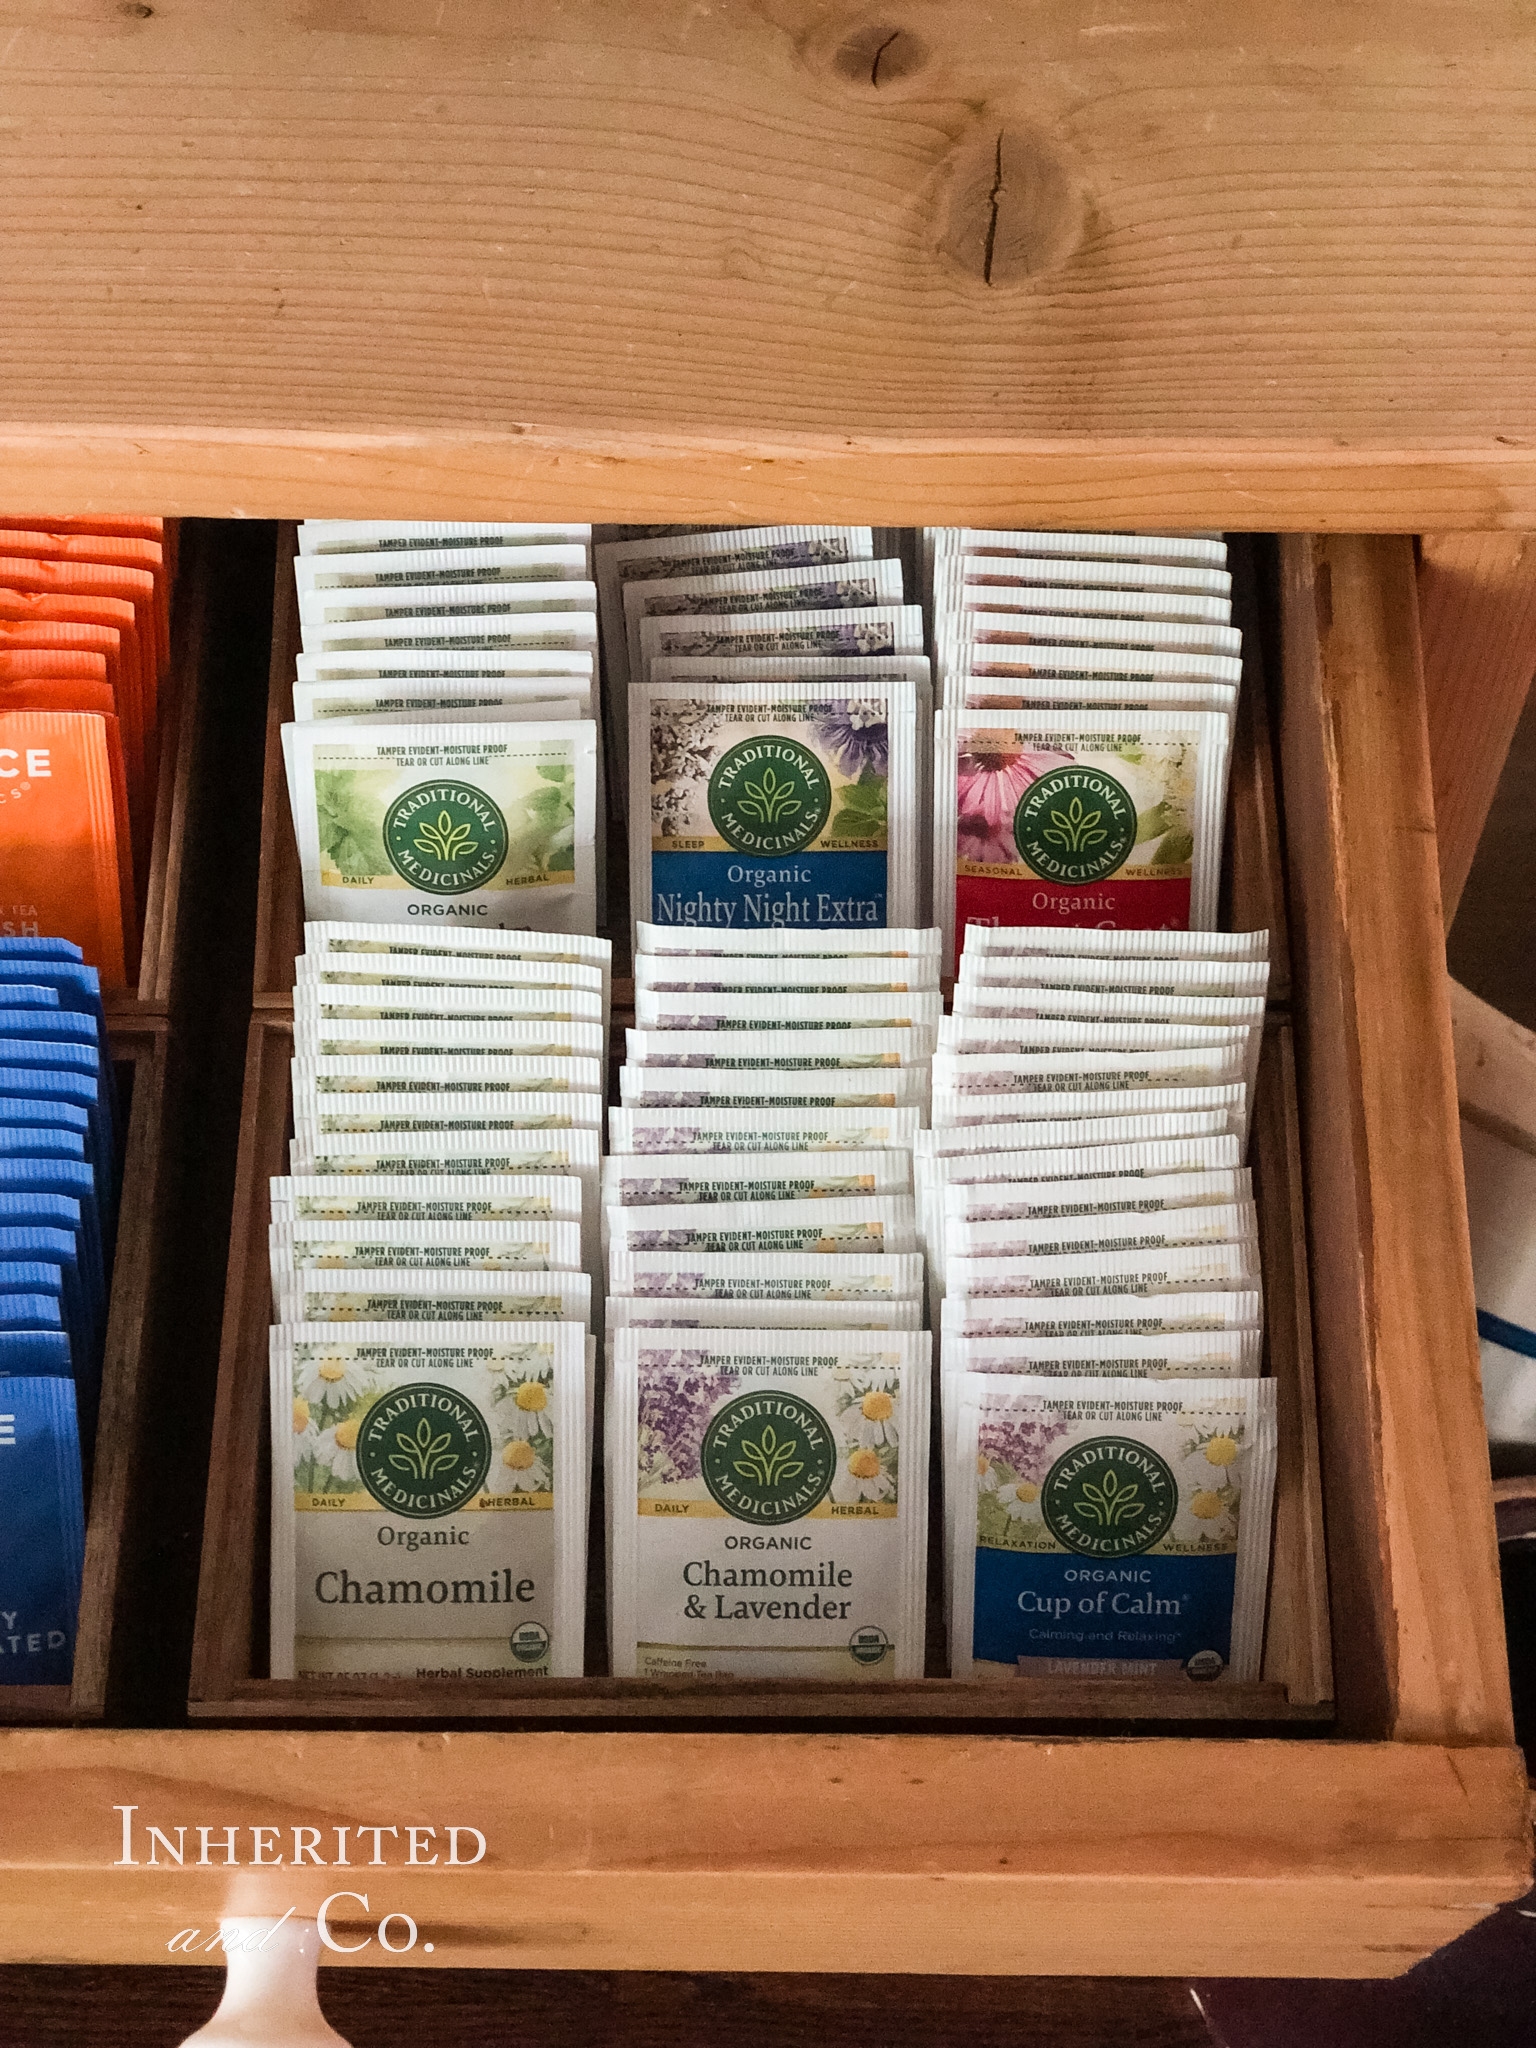 Traditional Medicinals teas organized in a drawer of an antique cabinet